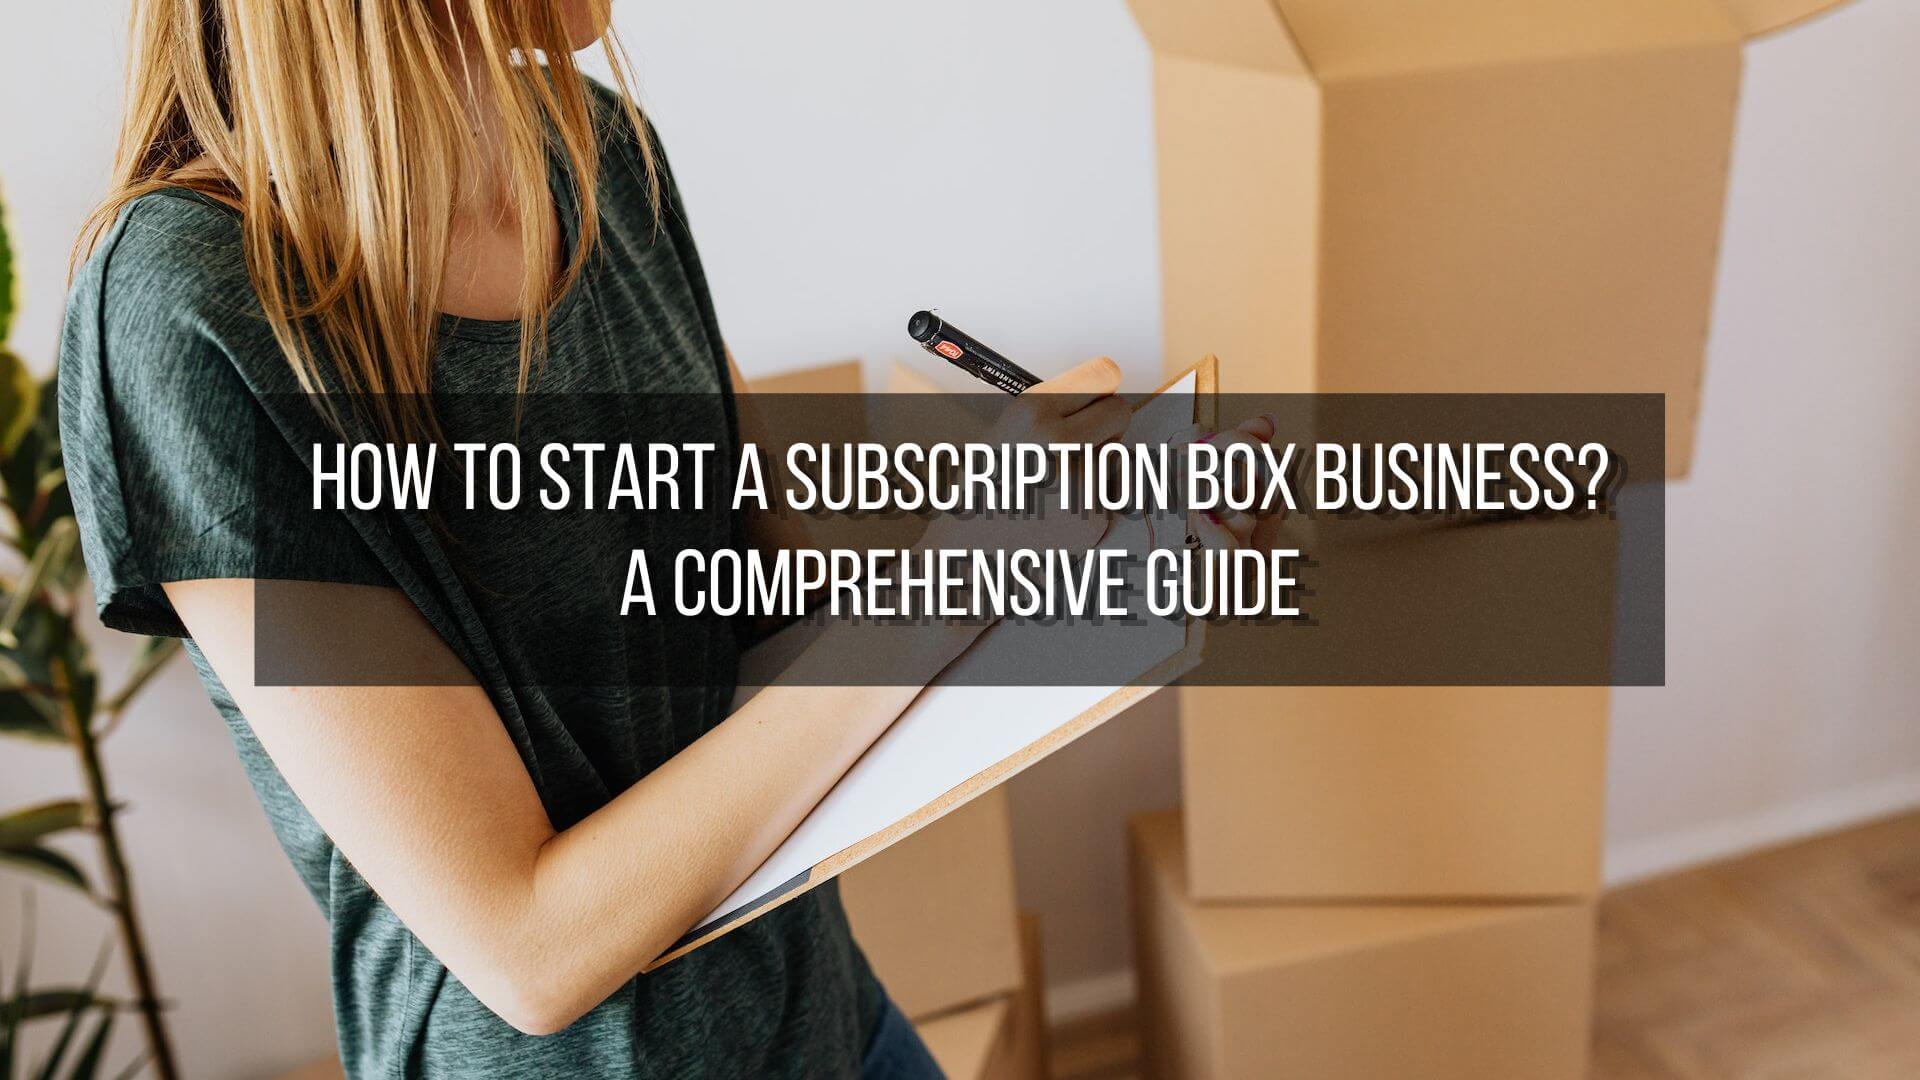 Starting a subscription box business has its own advantages that make it an attractive model for entrepreneurs. Click here to learn more!